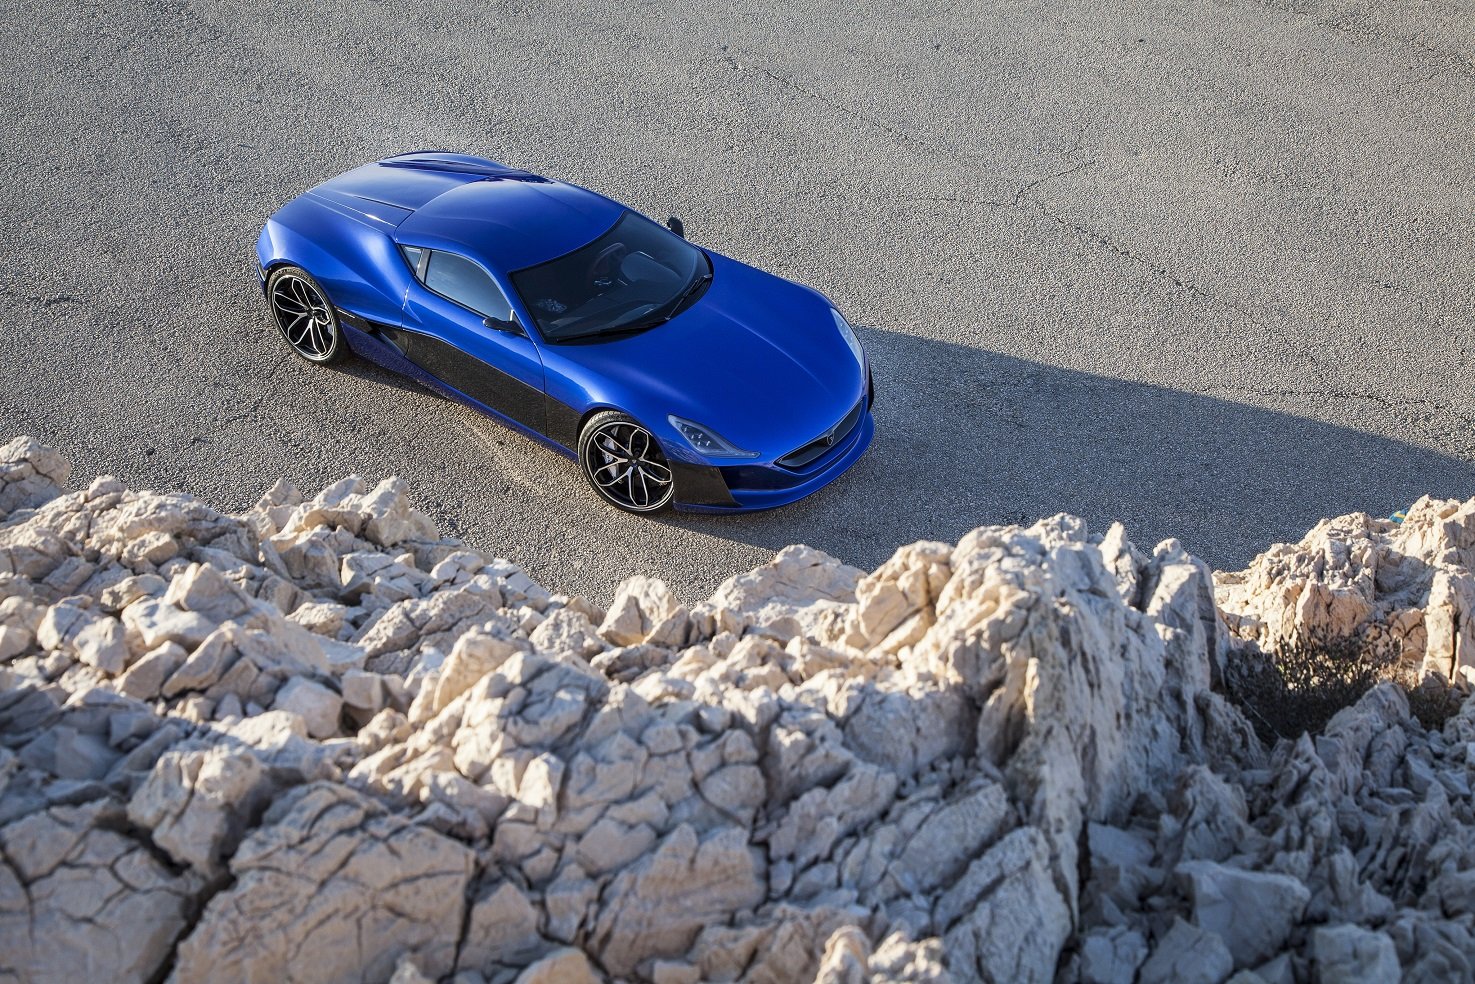 rimac, Concept, One, Cars, Coupe, 2014 Wallpaper